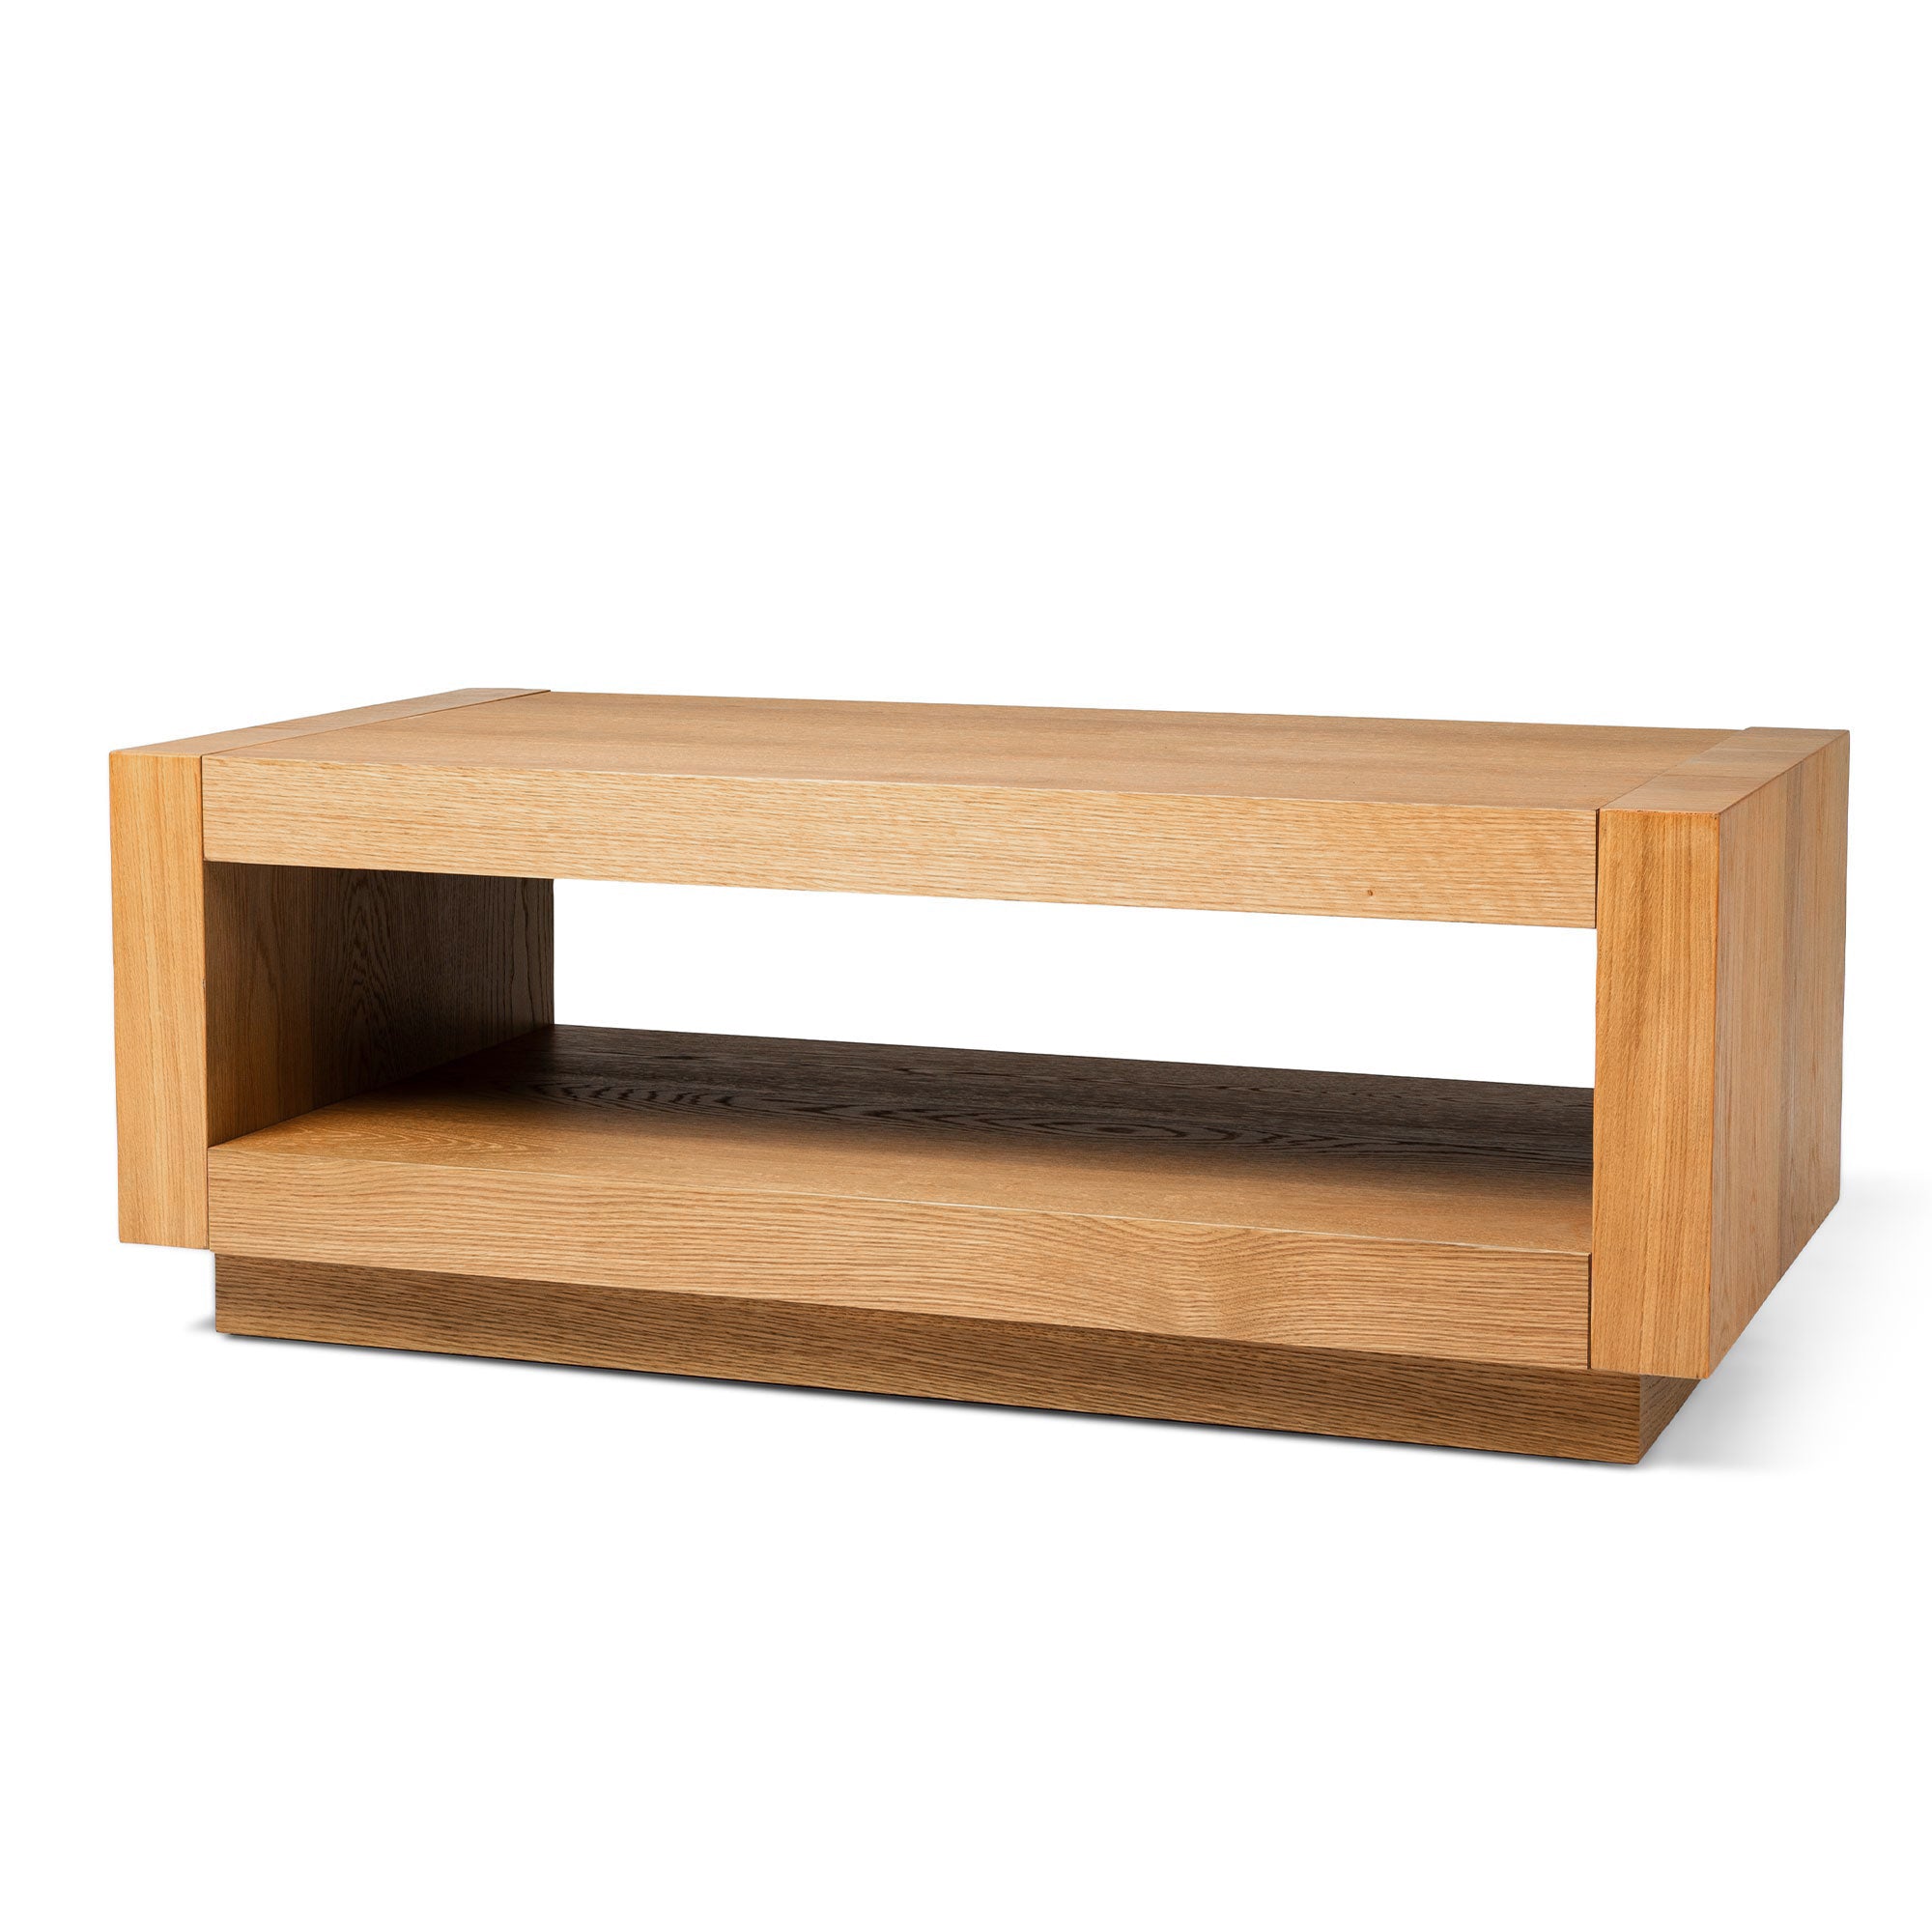 Artemis Contemporary Wooden Coffee Table in Refined Natural Finish in Accent Tables by Maven Lane